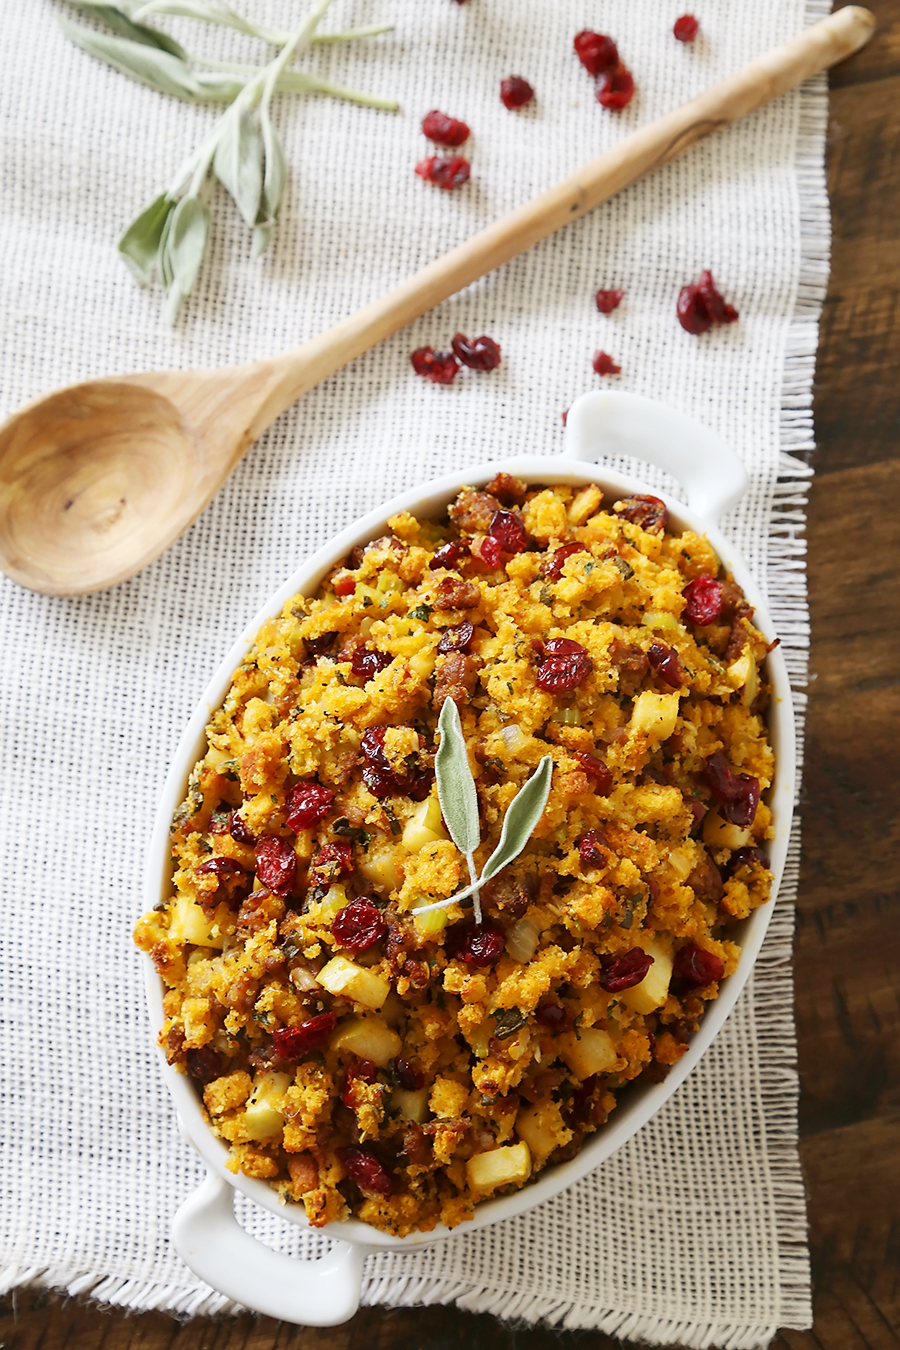 Sausage, Apple and Cranberry Cornbread Stuffing - This savory, delicious stuffing is my all-time favorite comfort food. It's a MUST for Thanksgiving + easy weeknight sides! thecomfortofcooking.com